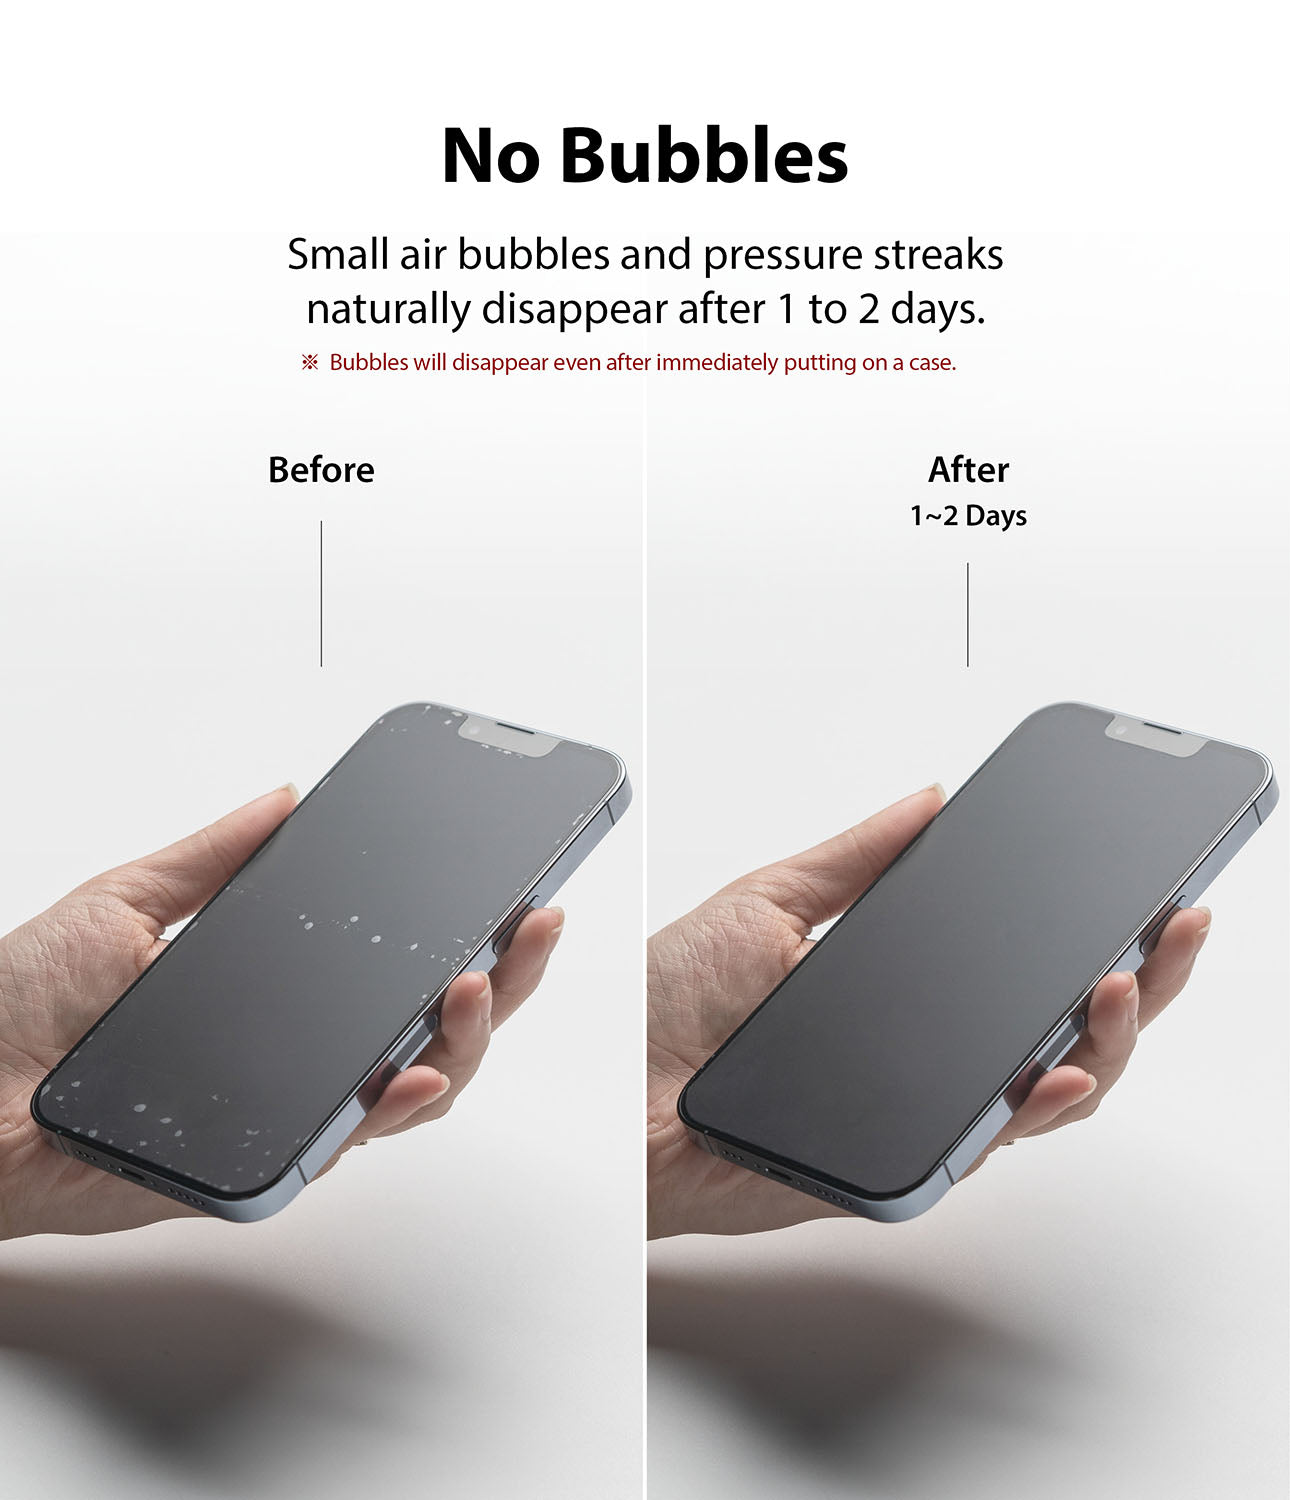 iPhone 13 Mini Screen Protector | Dual Easy Film Matte - No bubbles. Small air bubbles and pressure streaks naturally disappear after 1 to 2 days. Bubbles will disappear even after immediately putting on a case.